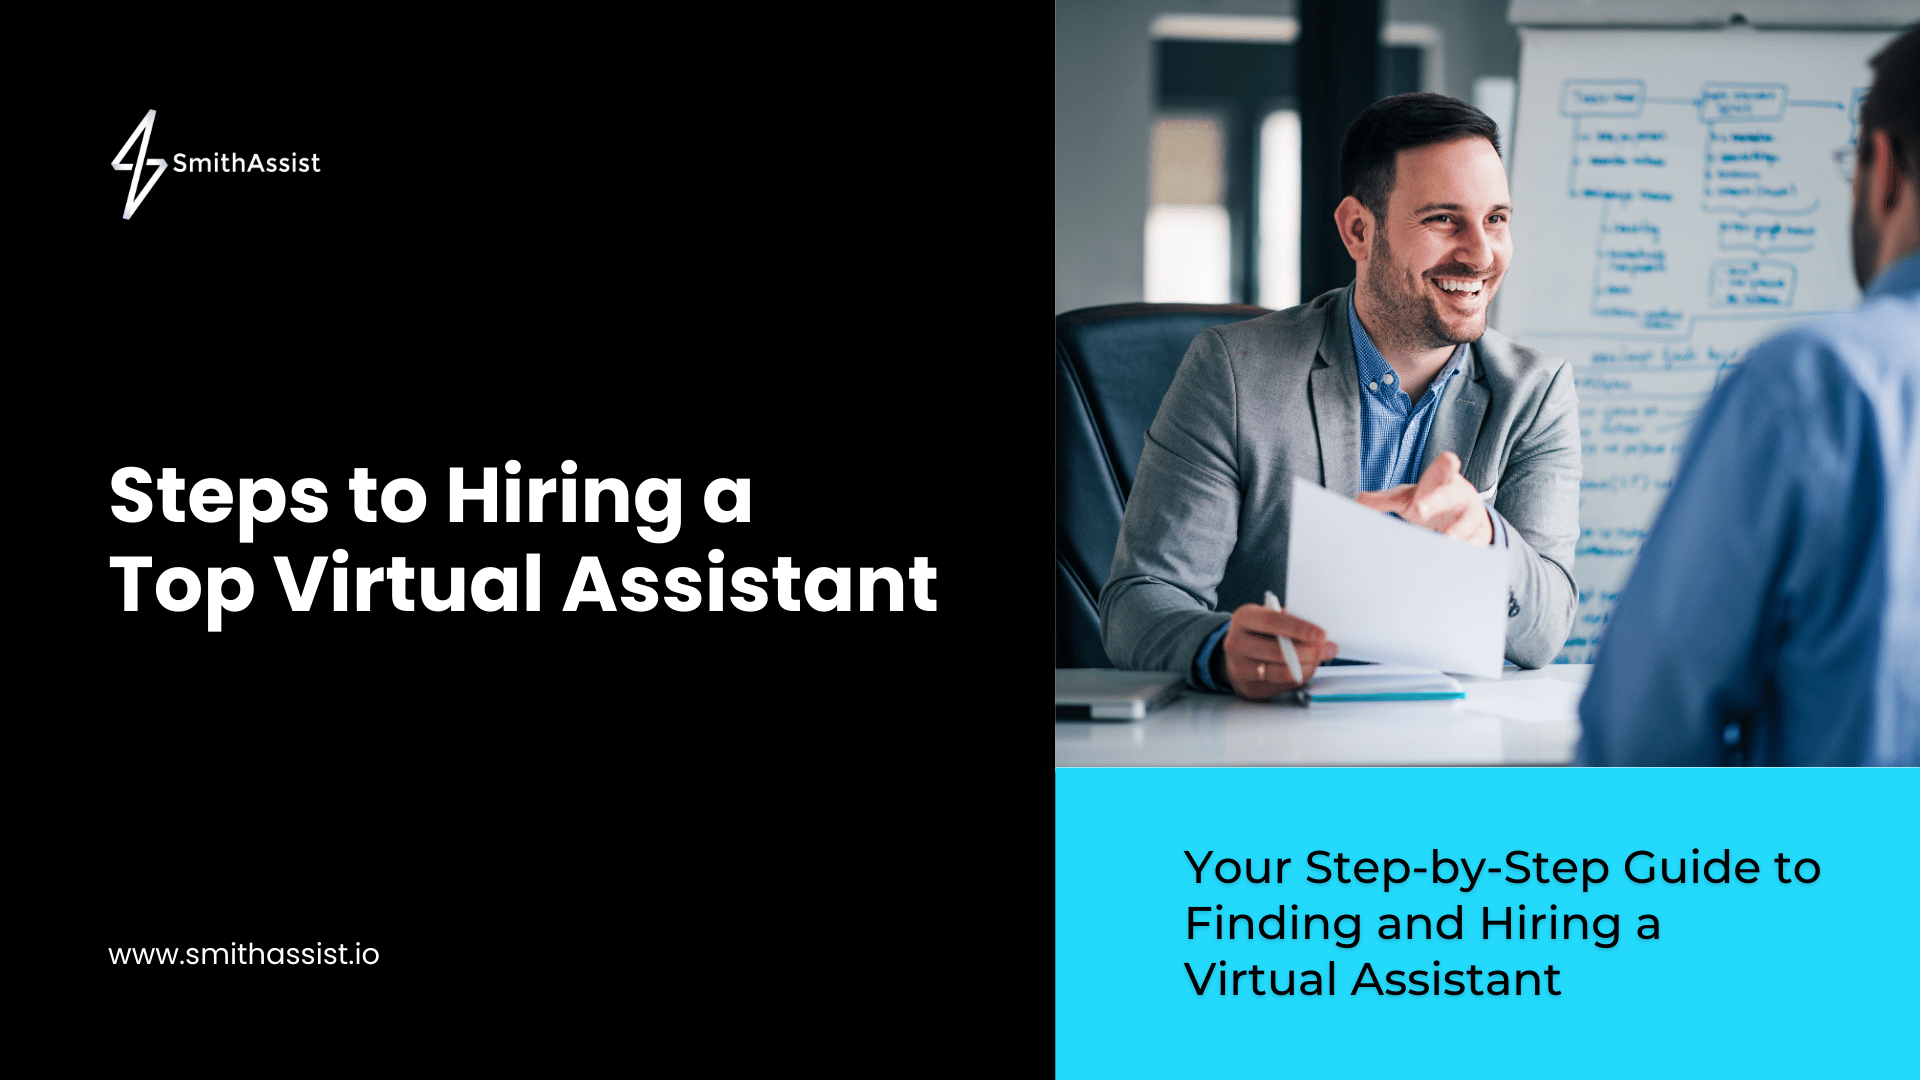 Your Step-by-Step Guide to Finding and Hiring a Virtual Assistant